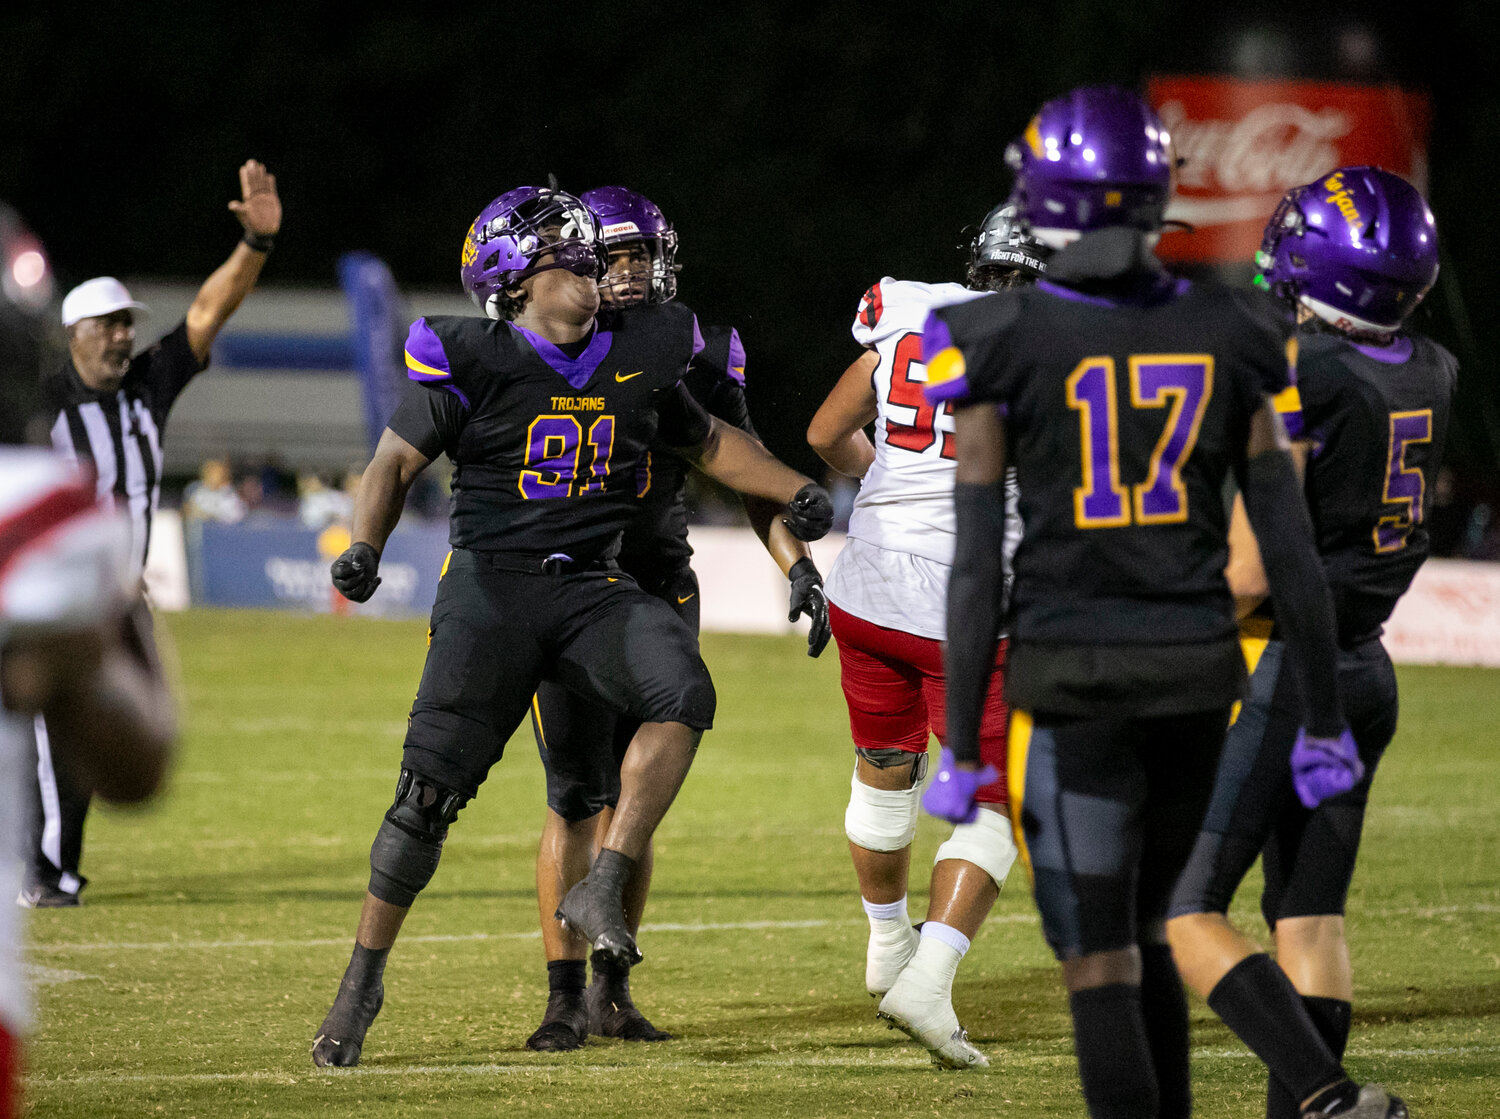 Daphne junior Marquaes Lambert (91) celebrates a big stop in the first quarter of rivalry action against the Spanish Fort Toros on Friday, Sept. 29, at Jubilee Stadium. The Trojans held Spanish Fort to 7 first-half points in the 12th installment of the Eastern Shore rivalry.